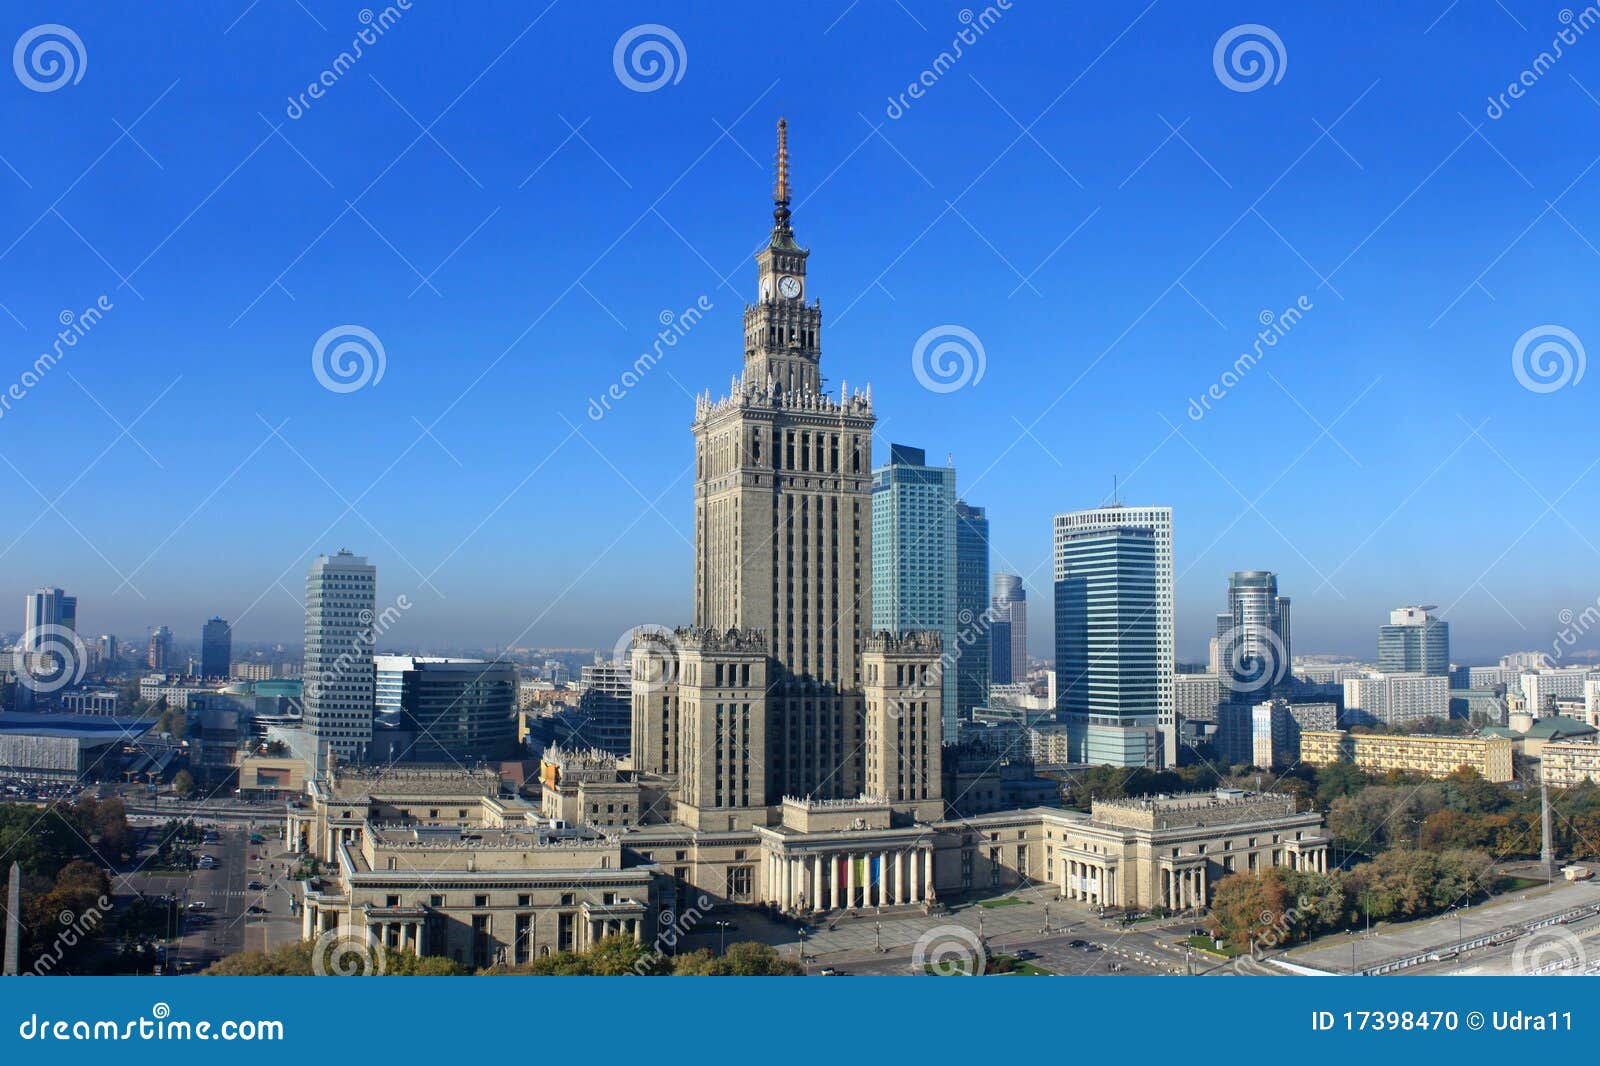 palace of science and culture in warsaw